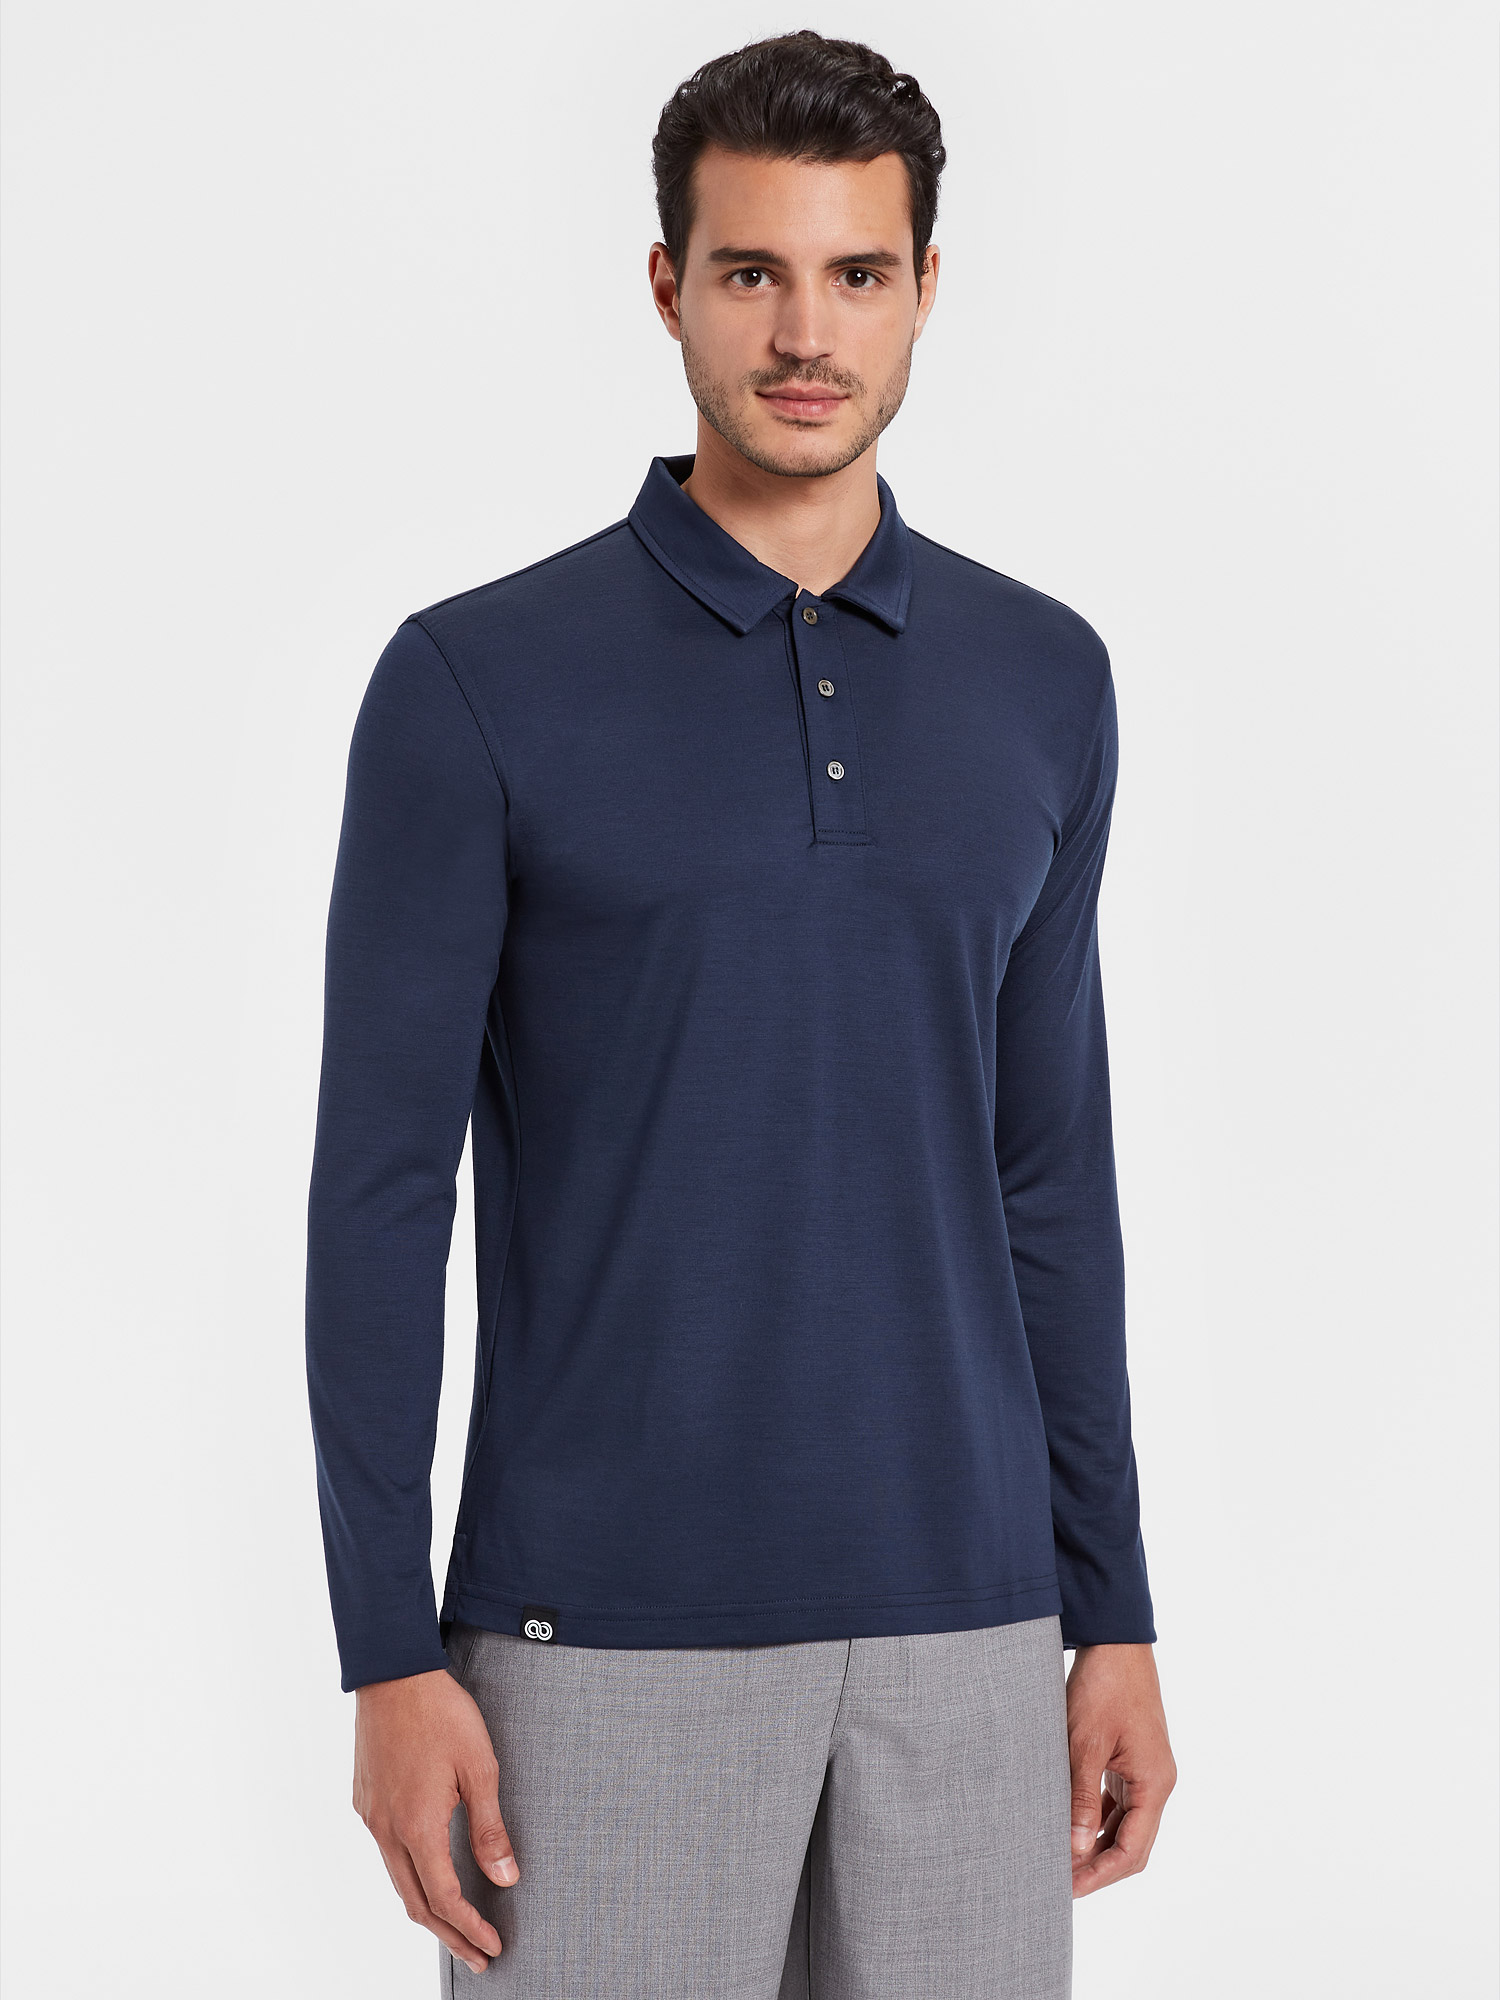 INDY - blue merino jersey 190 gr polo long sleeve for man